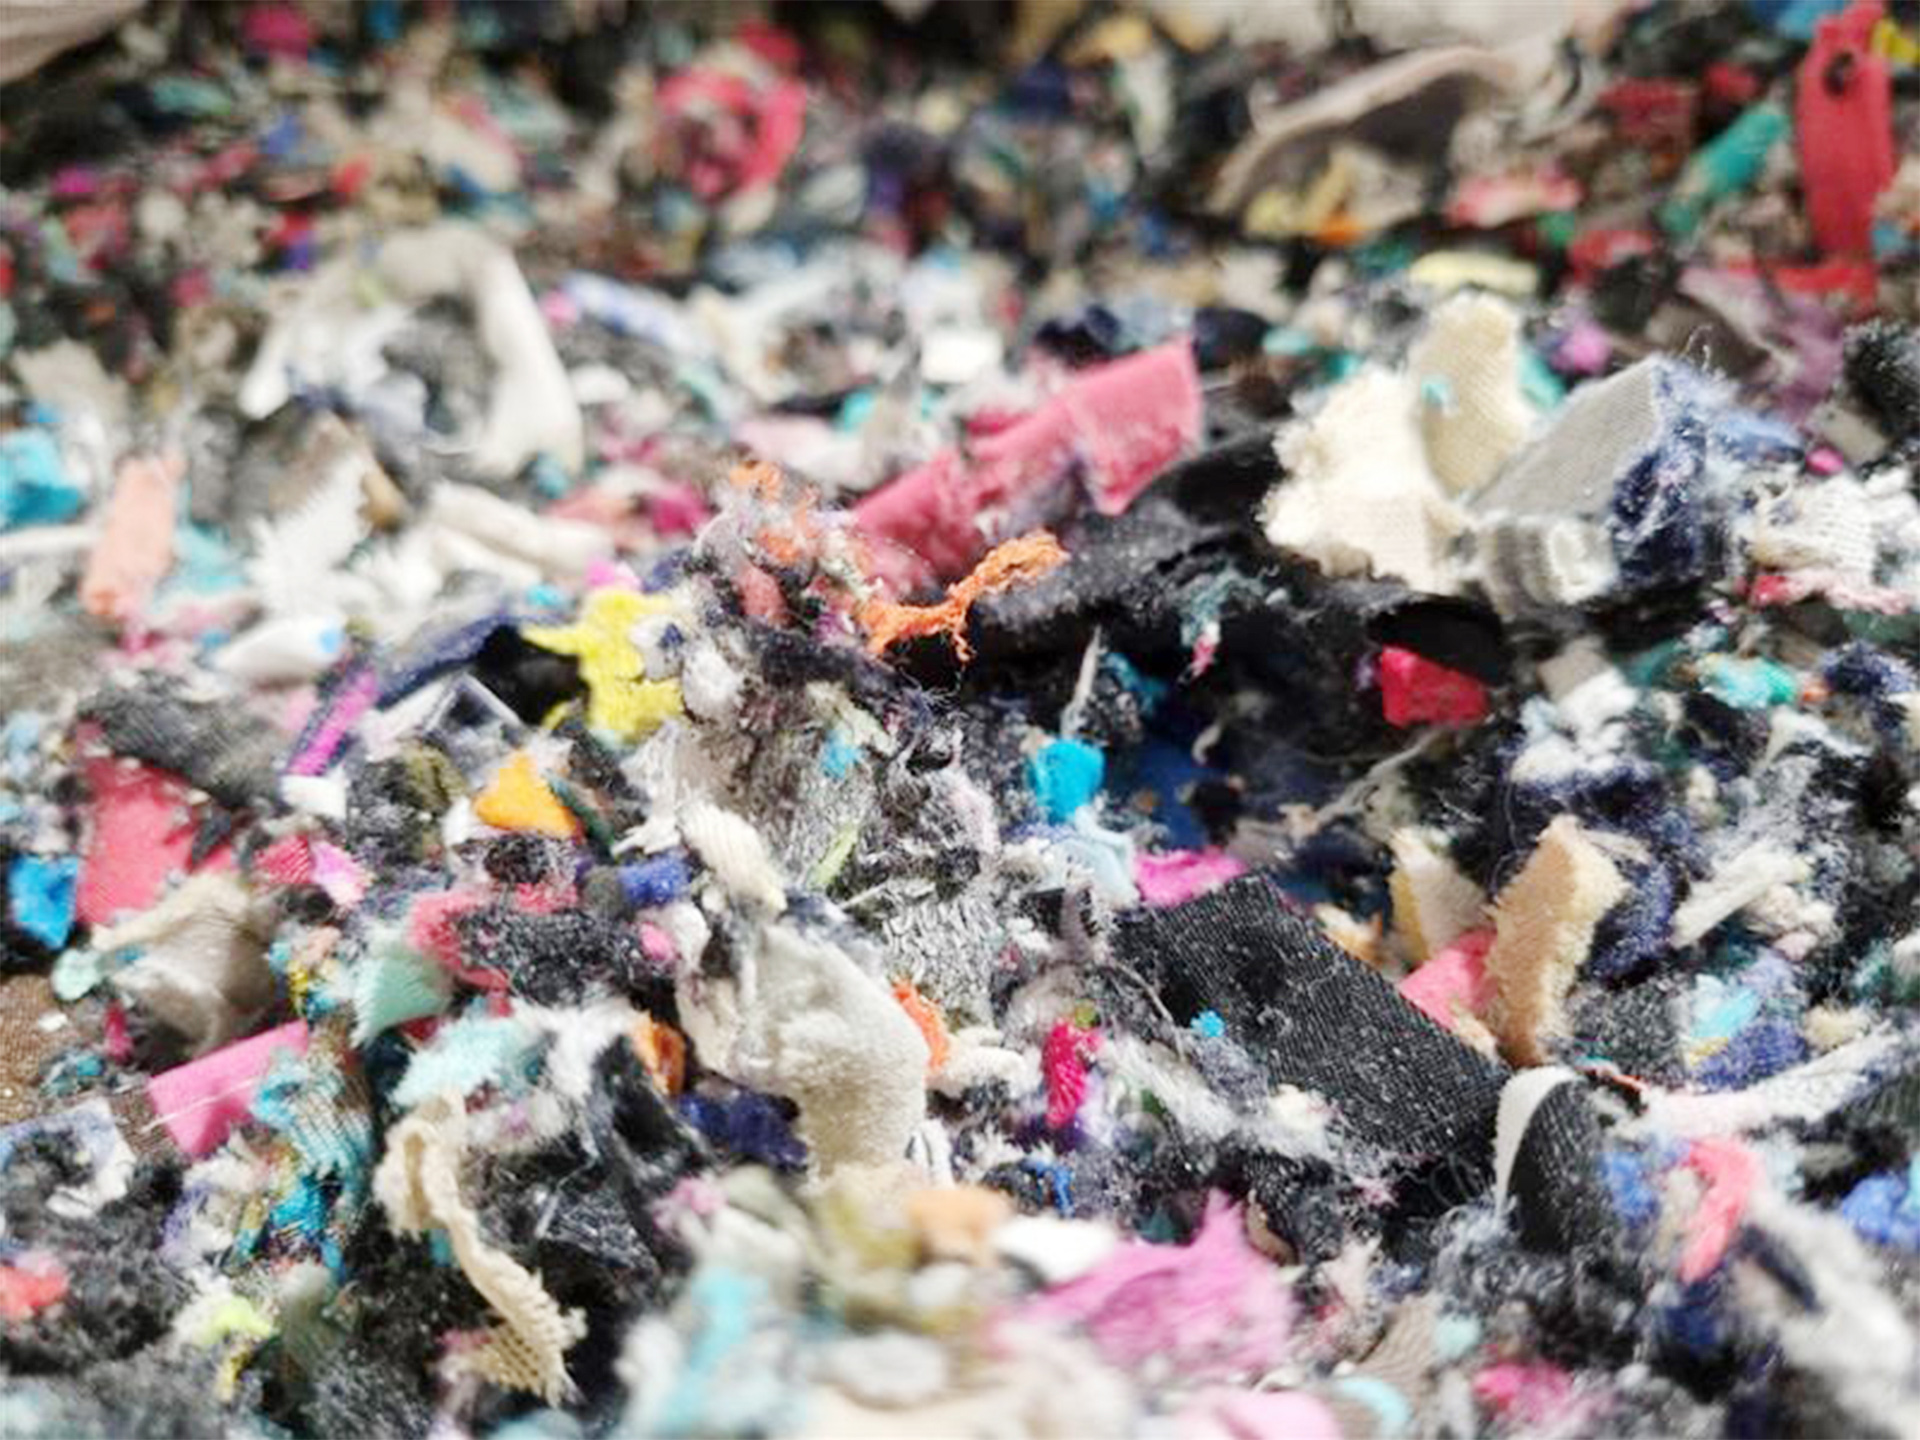 Textiles recycling: the sorting challenge